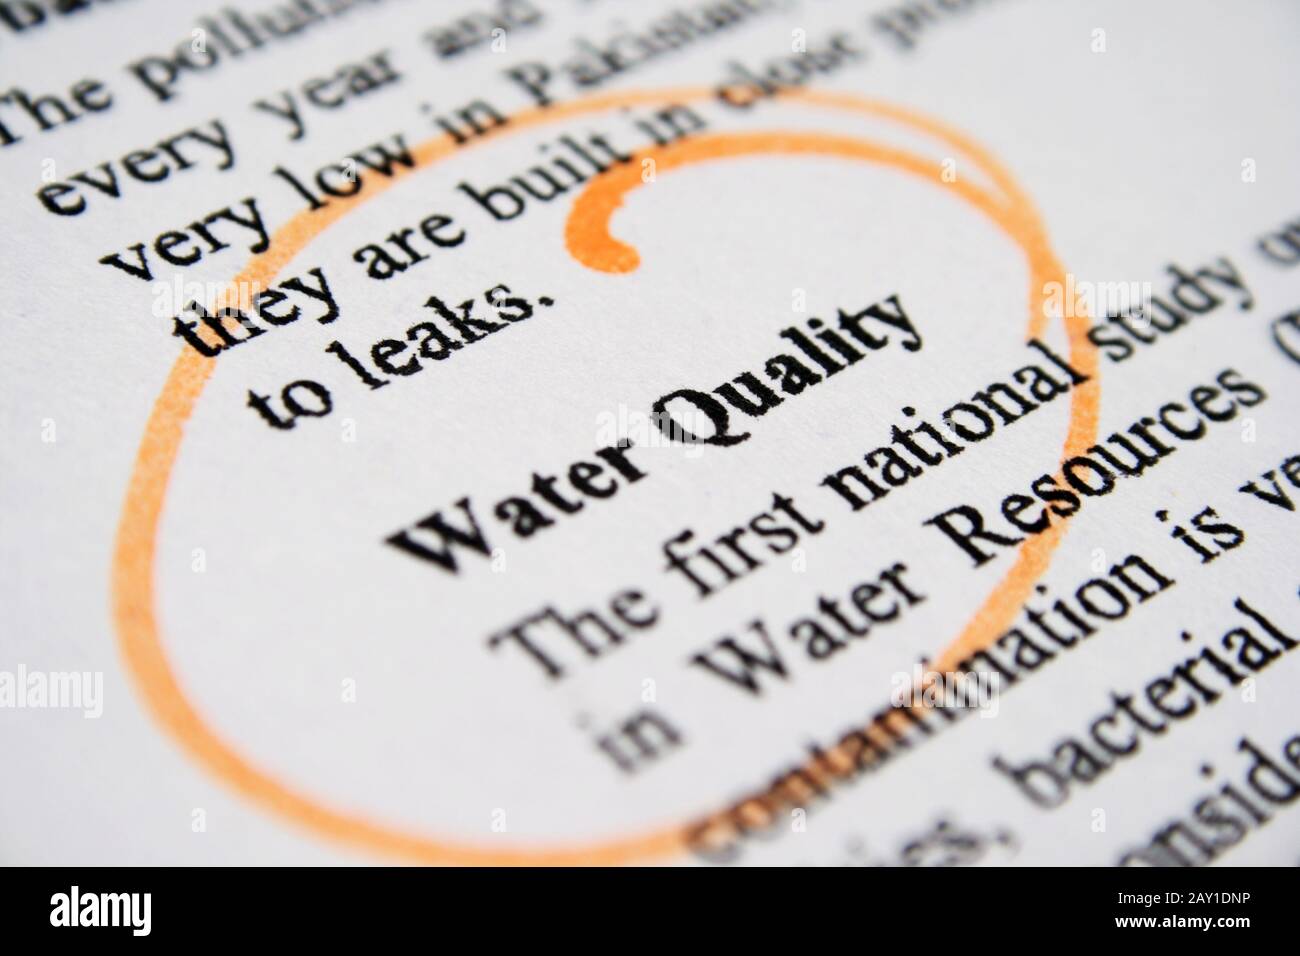 Water quality Stock Photo